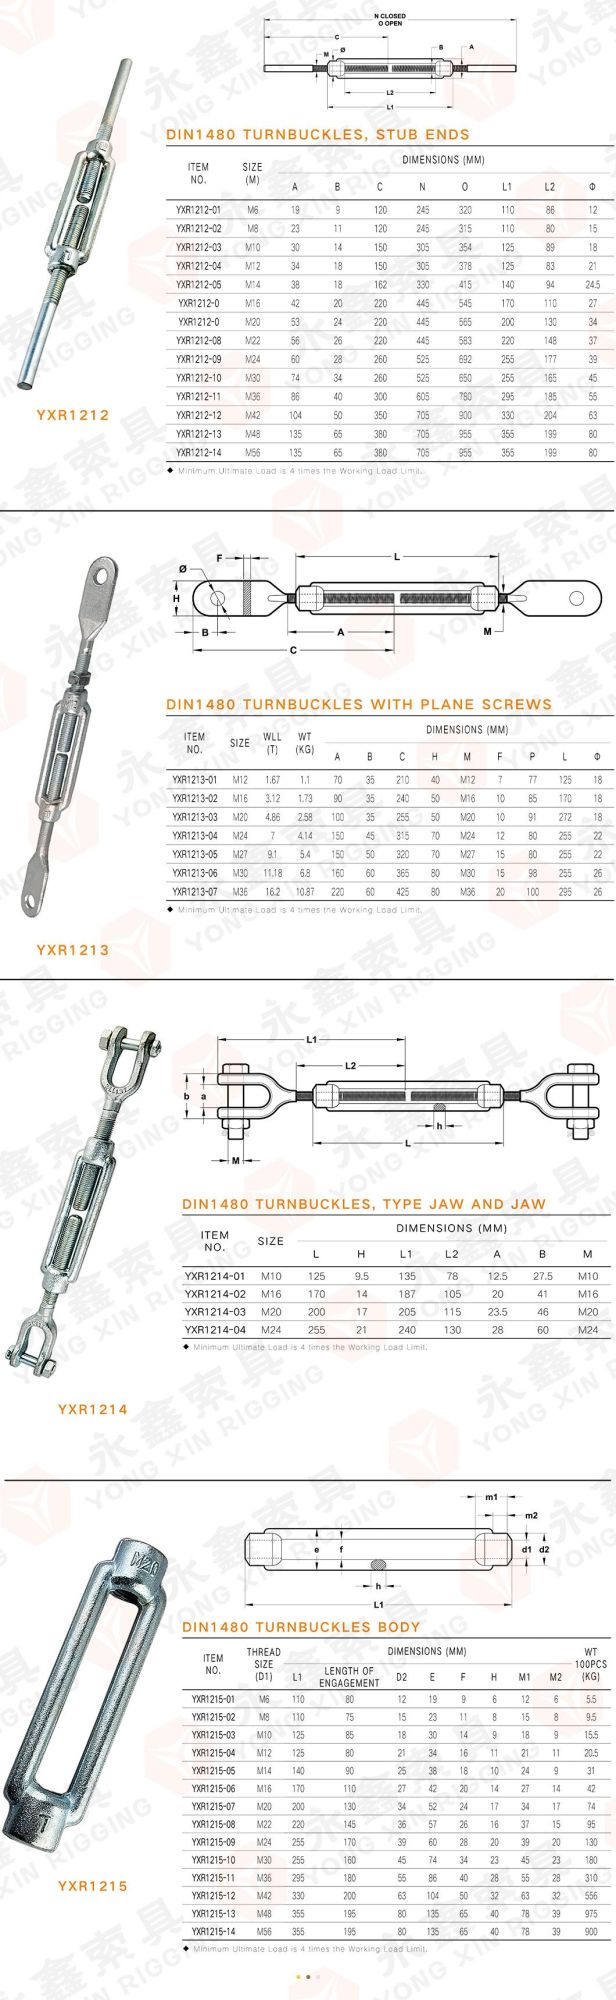 M6-M56 Standard Drop Forged Stainless Steel DIN1480 Turnbuckles with Hook and Eye